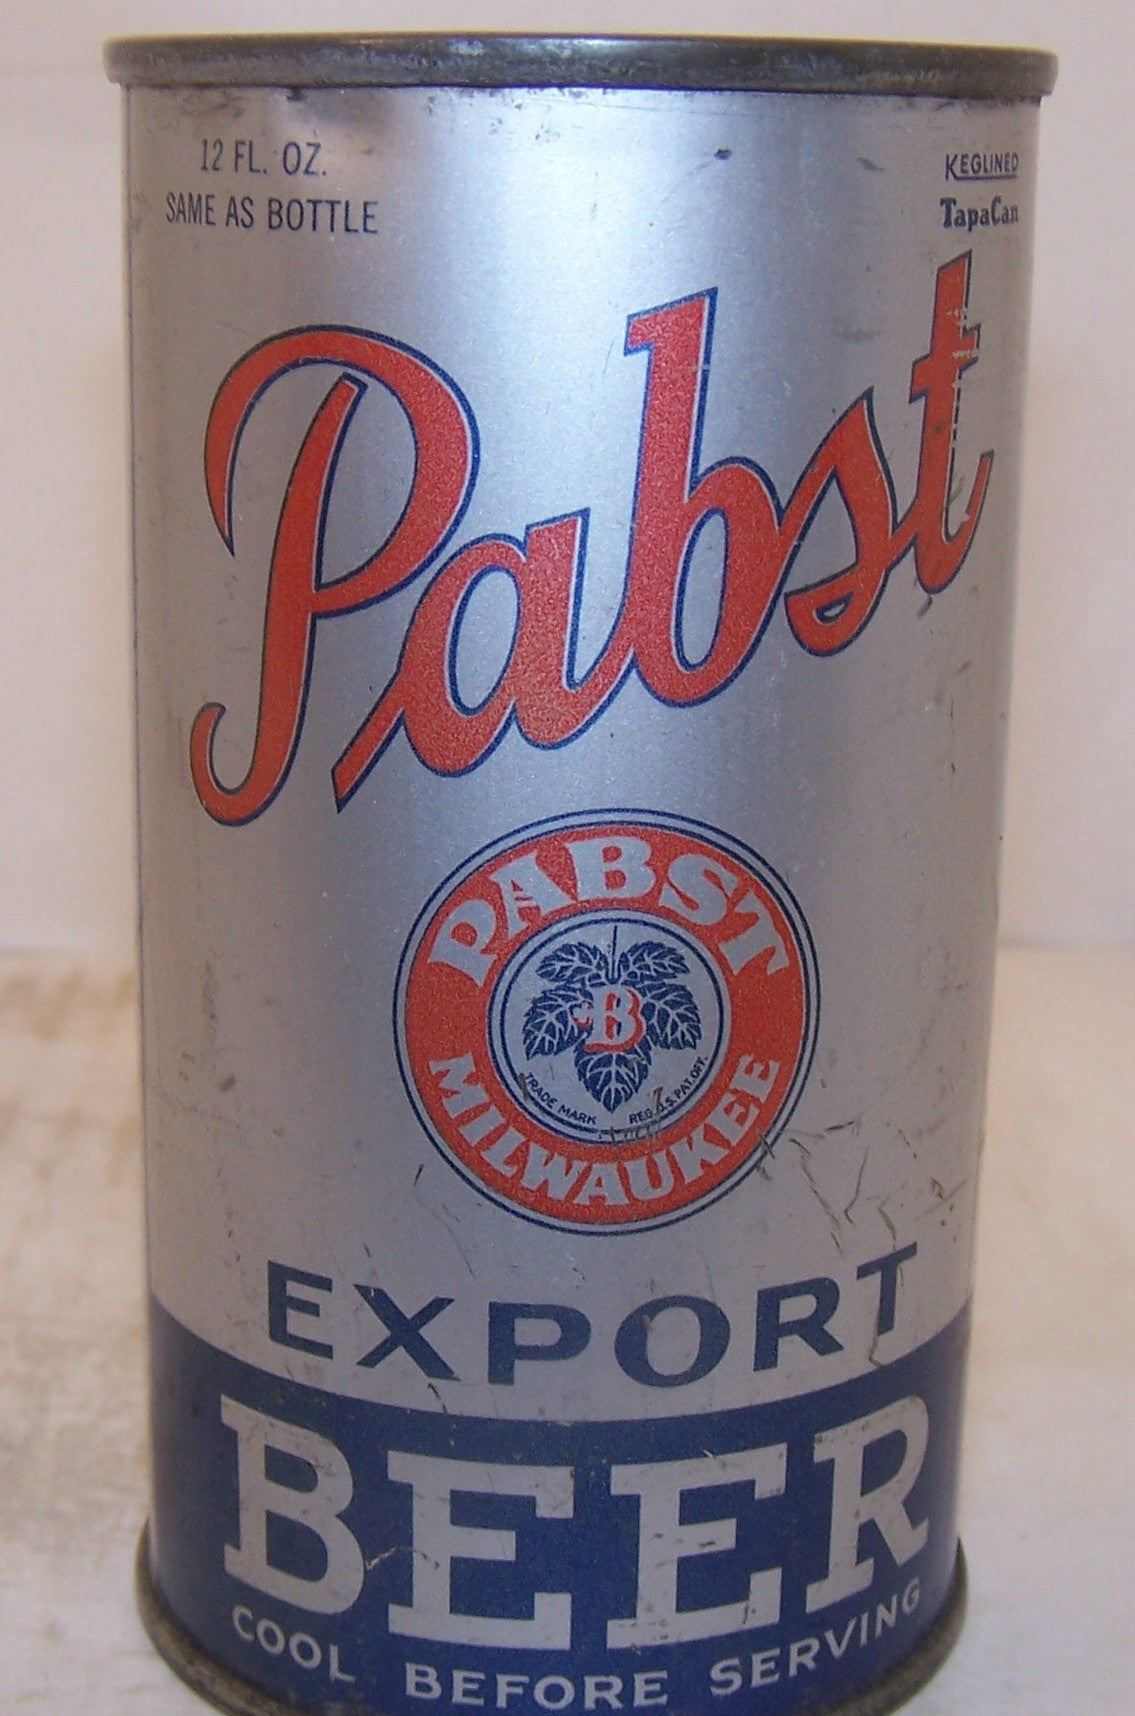 Pabst Export Beer, Lilek page # 642, Grade 1/1-  Sold 12/20/14